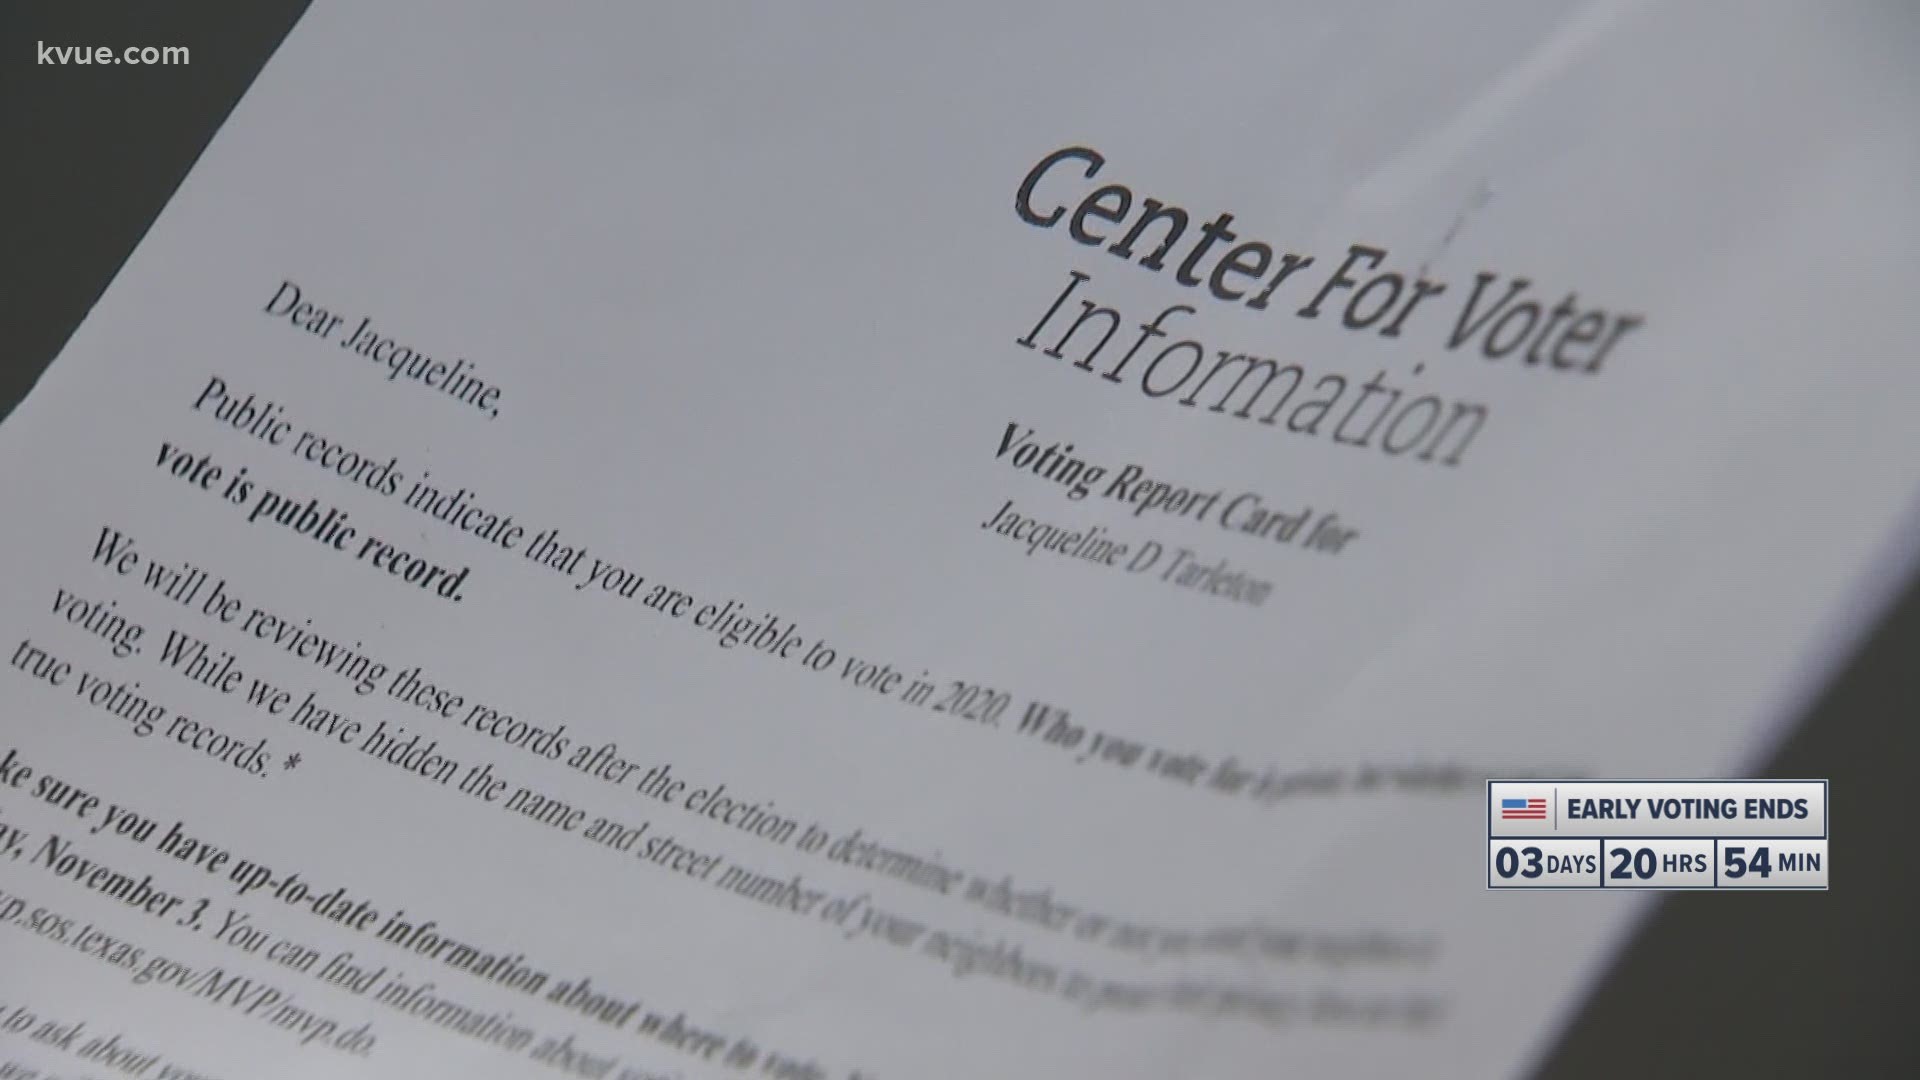 A Pflugerville woman is concerned over a letter she got in the mail. She thinks the contents may scare others away from voting.